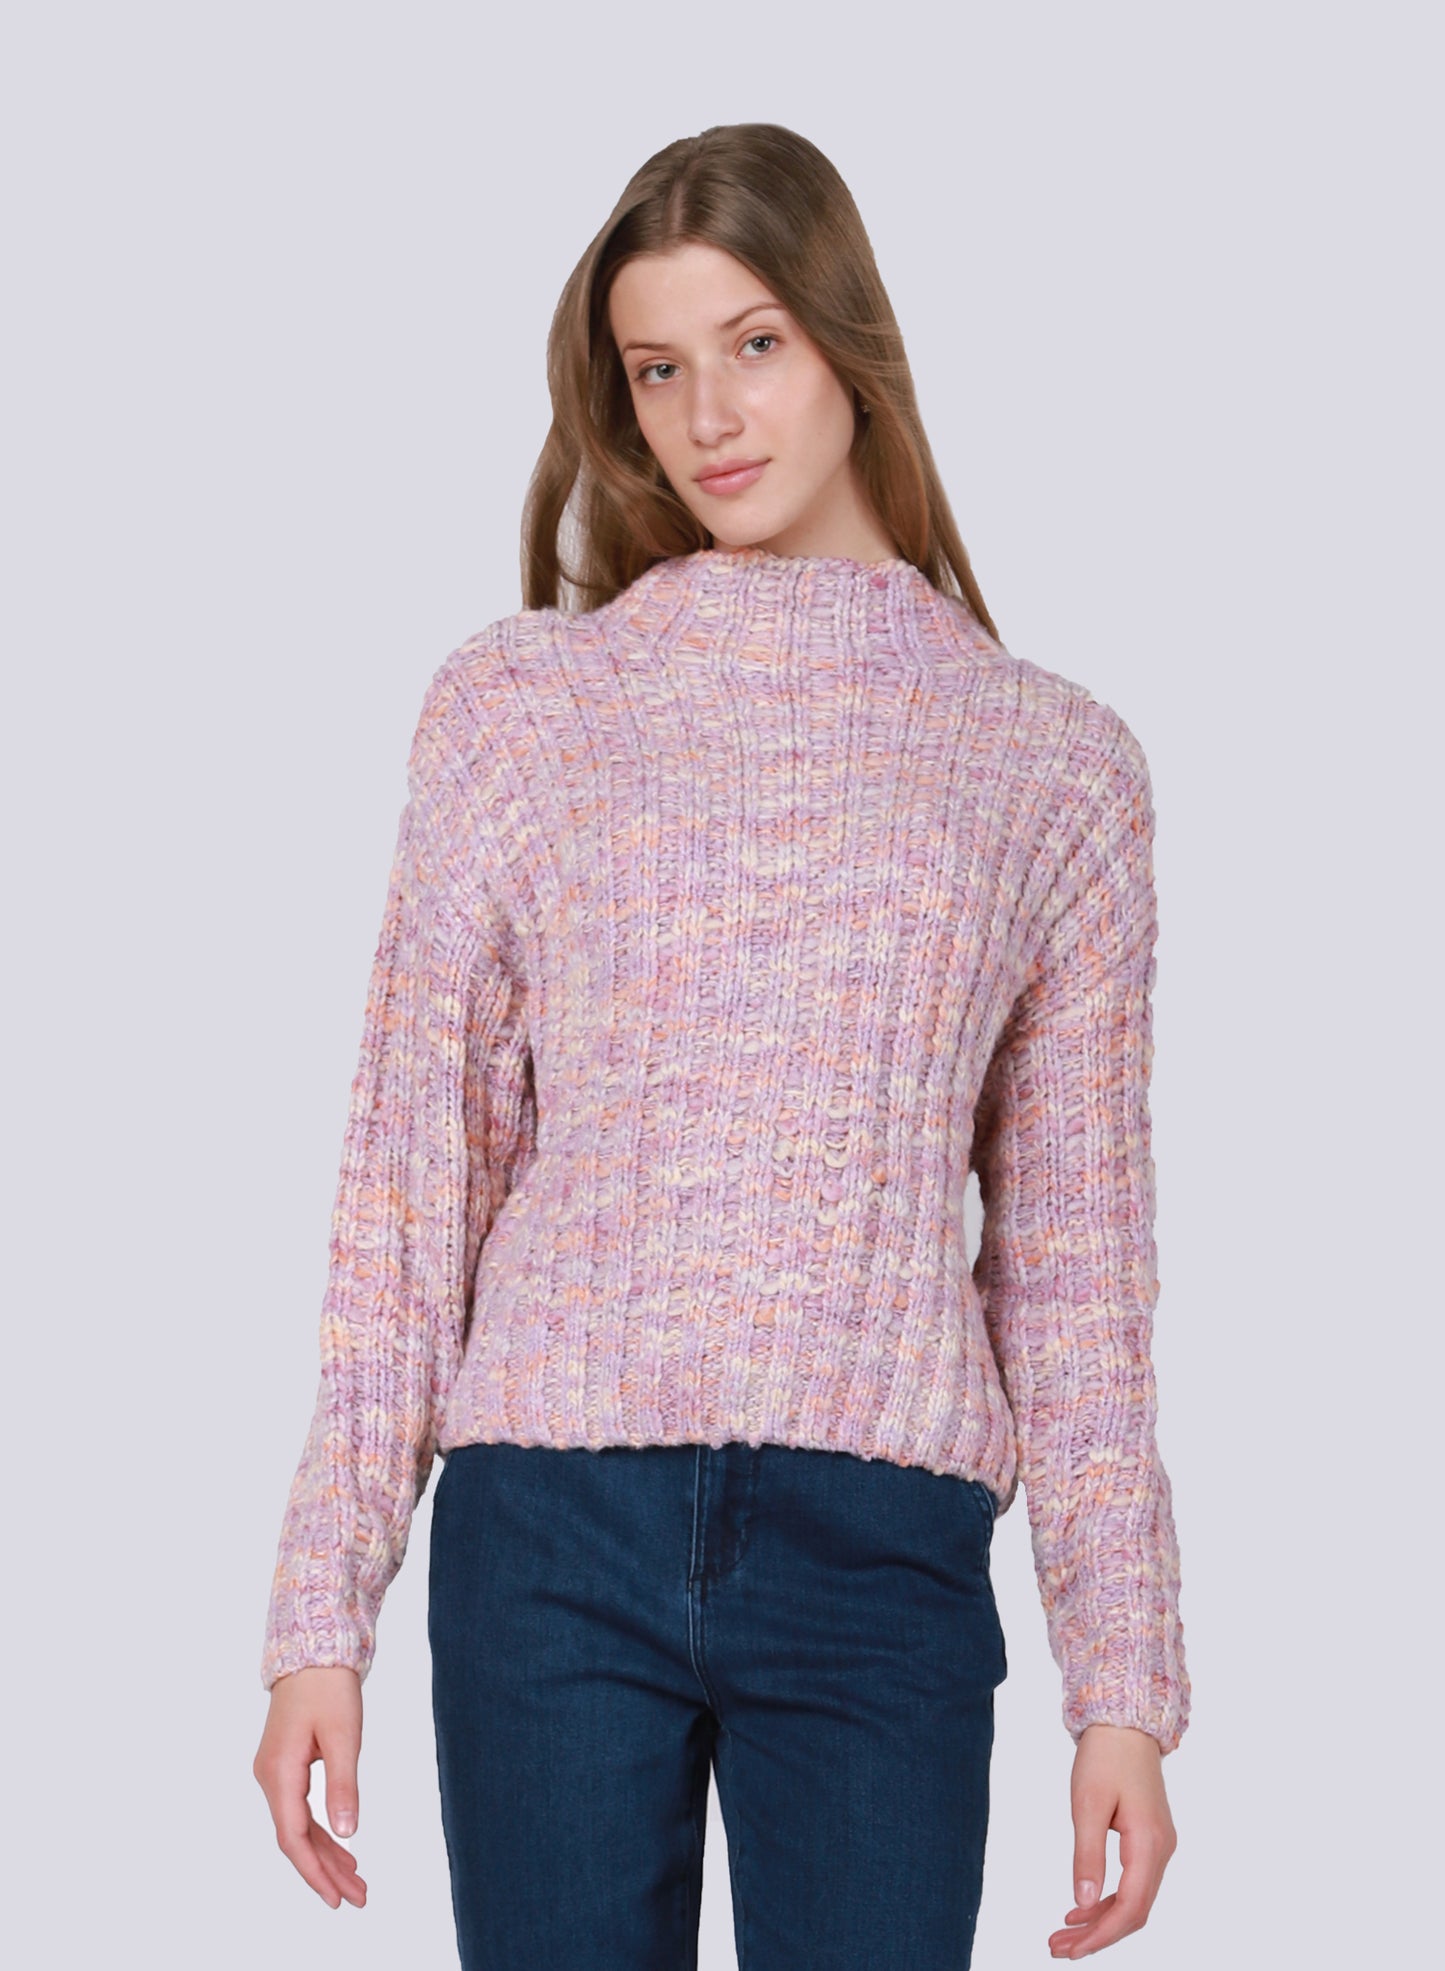 Textured Stiched Sweater